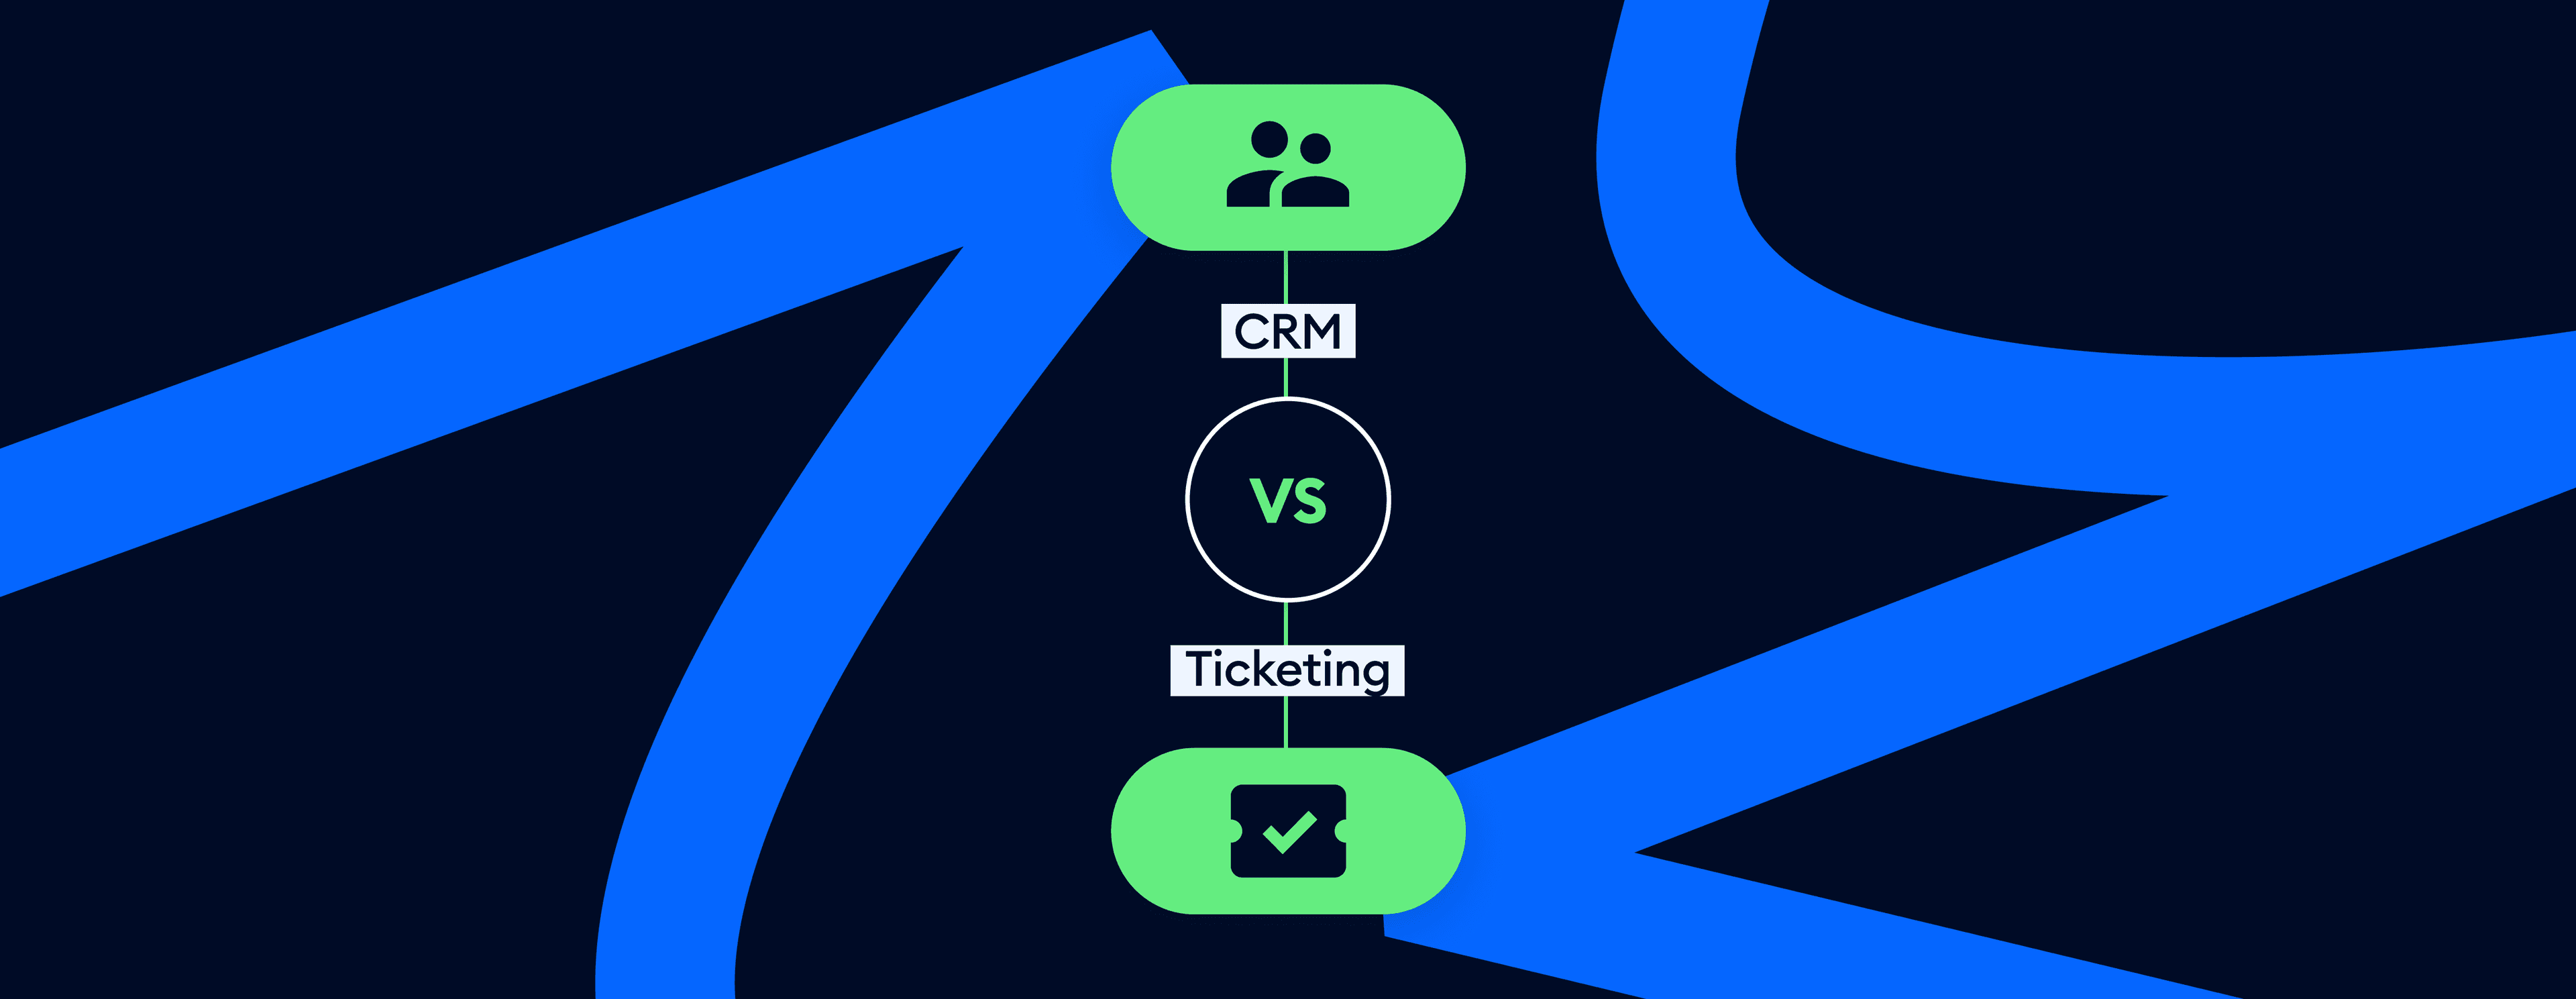 crm vs ticketing cover image